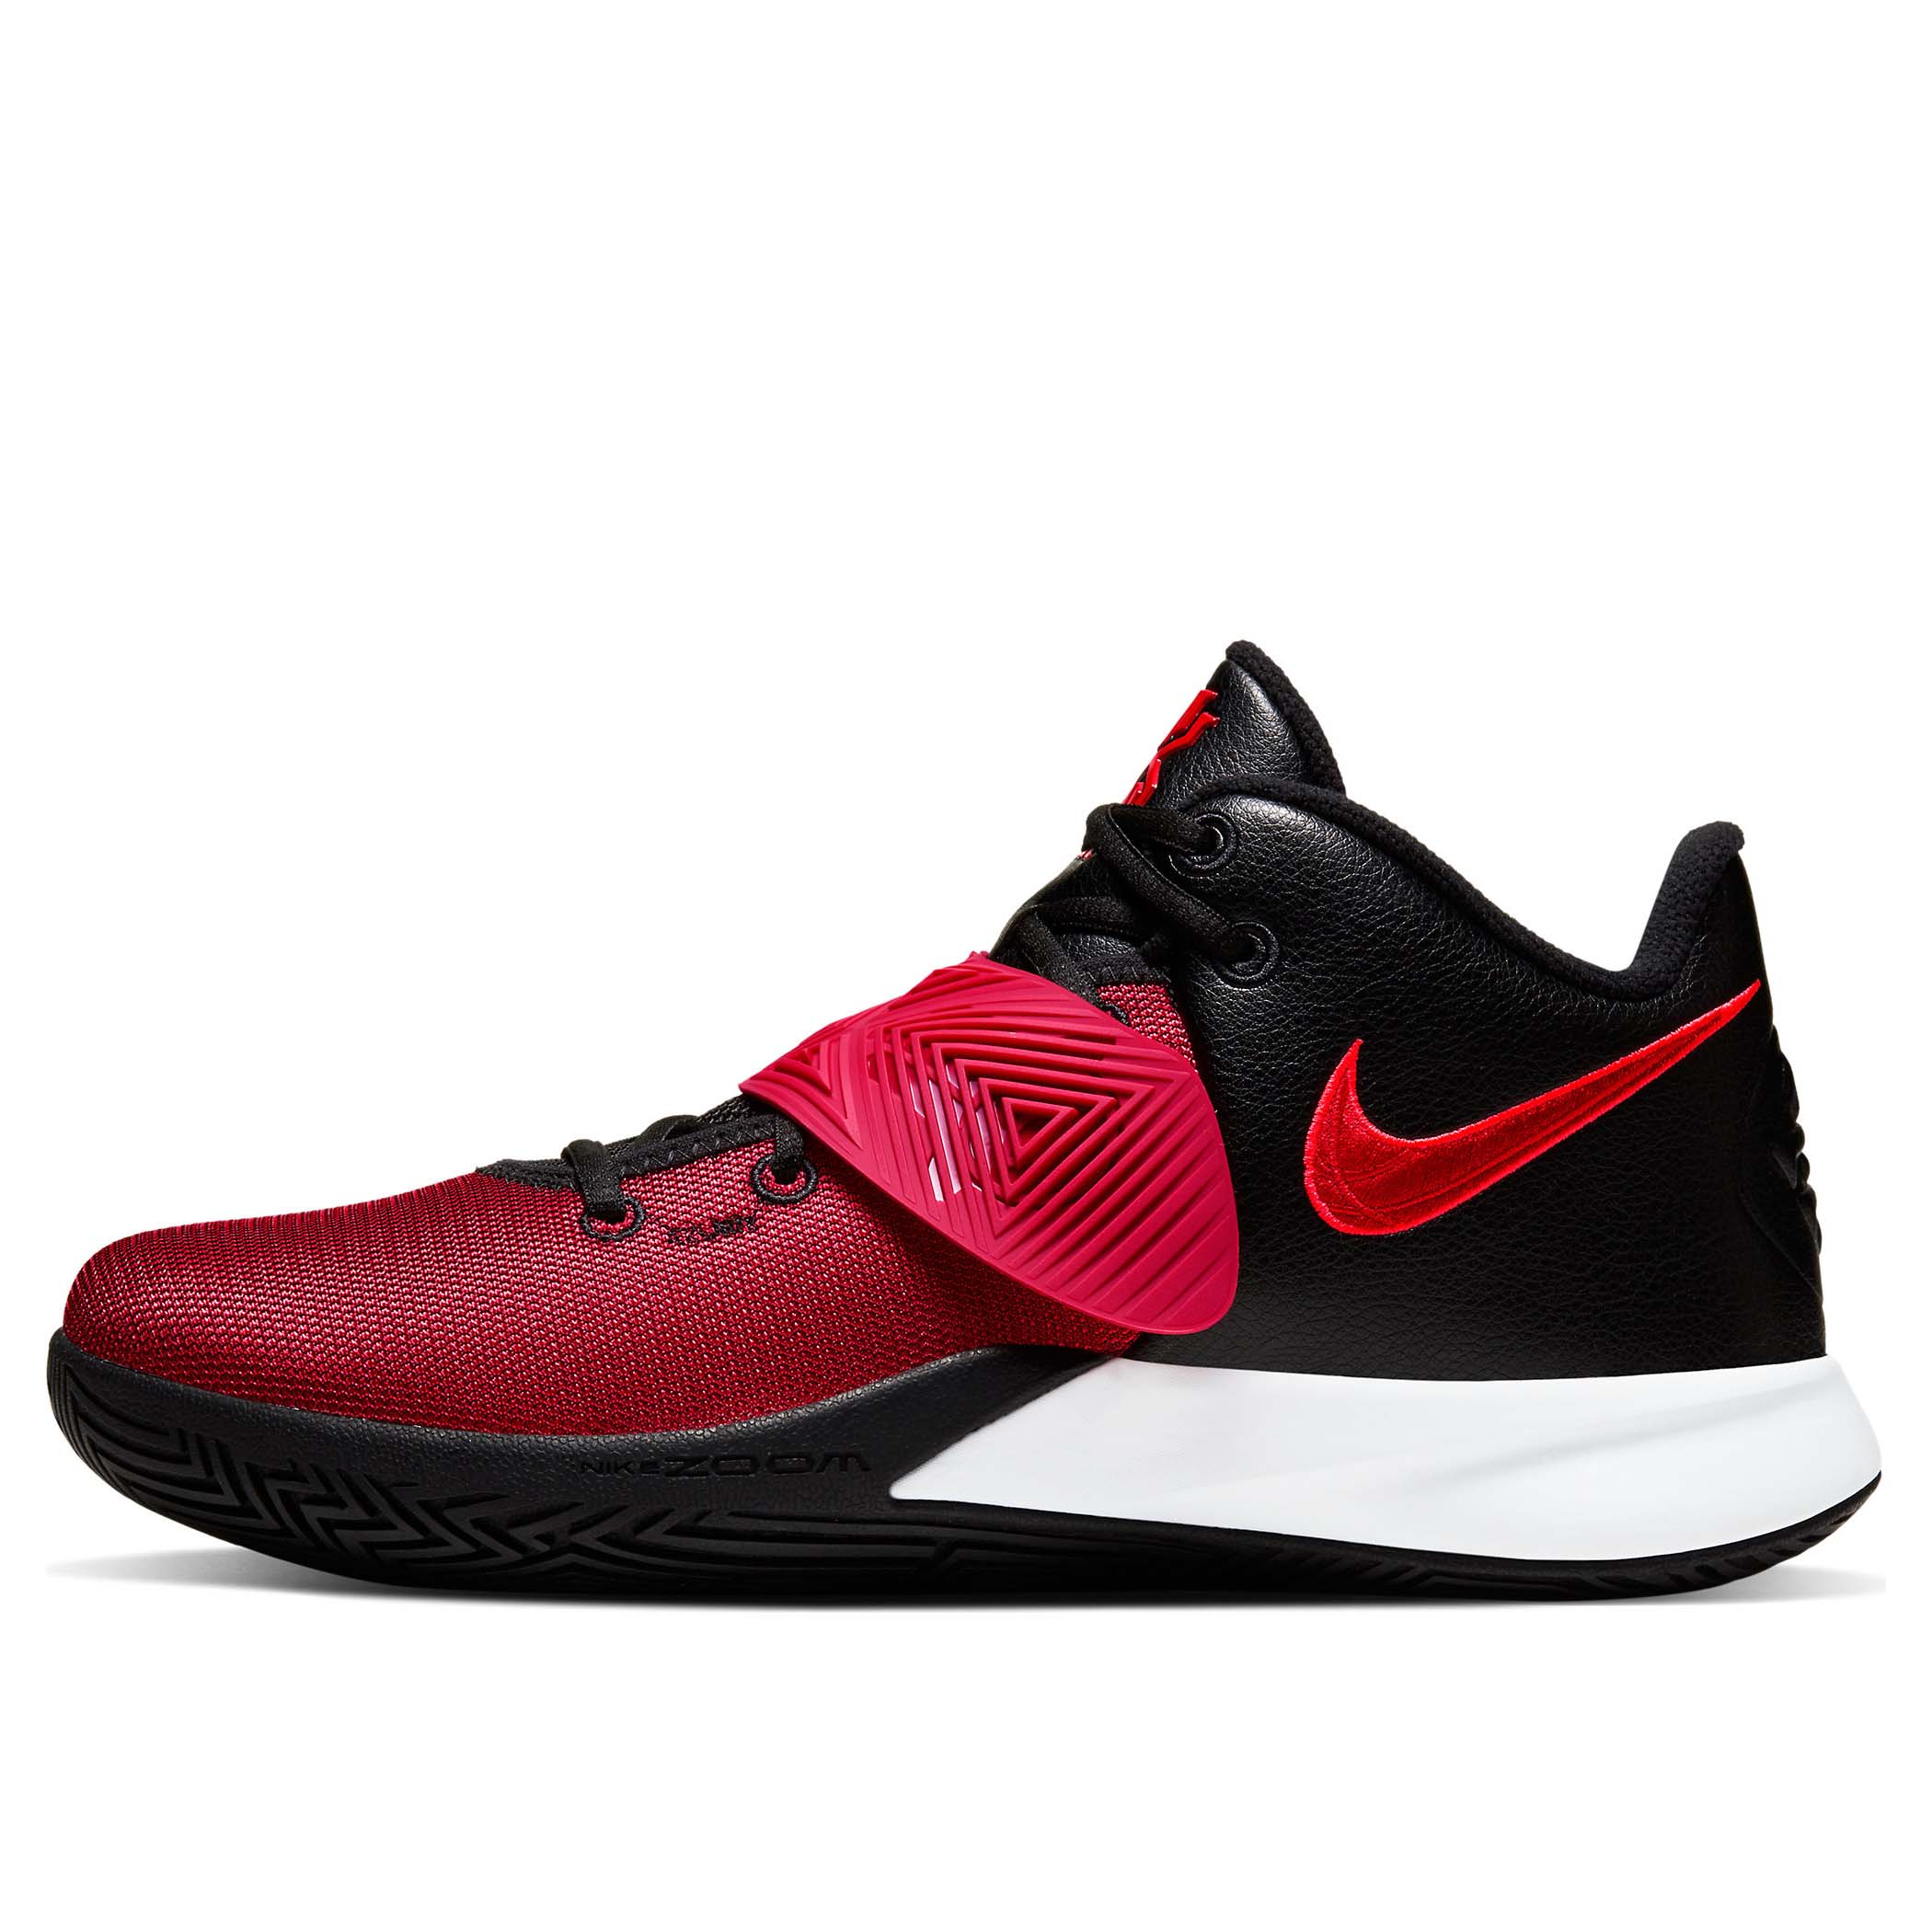 kyrie flytrap 3 red